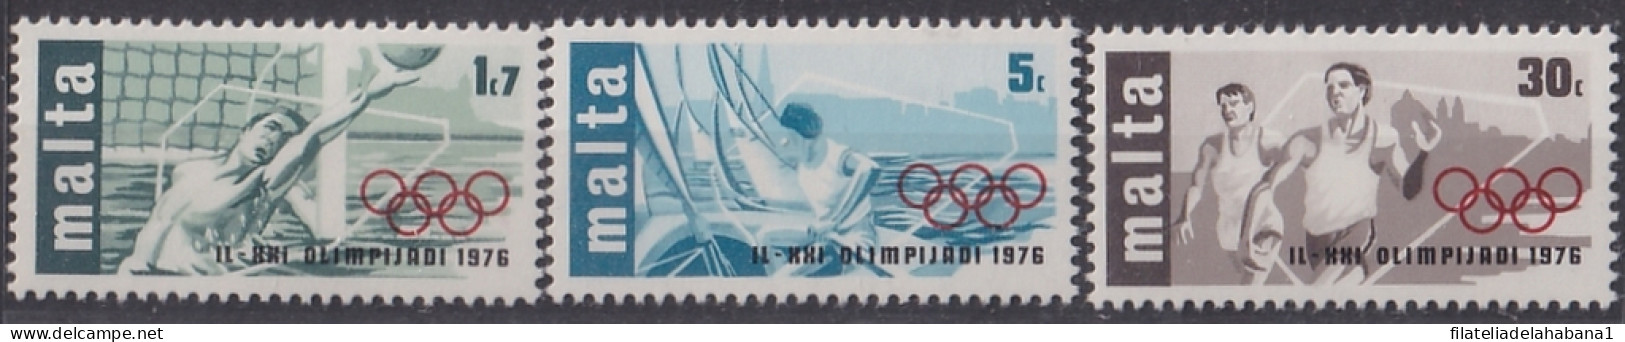 F-EX47597 MALTA MNH 1976 MONTREAL OLYMPIC GAMES ATHLETISM YACHTING WATERPOLO.  - Ete 1976: Montréal